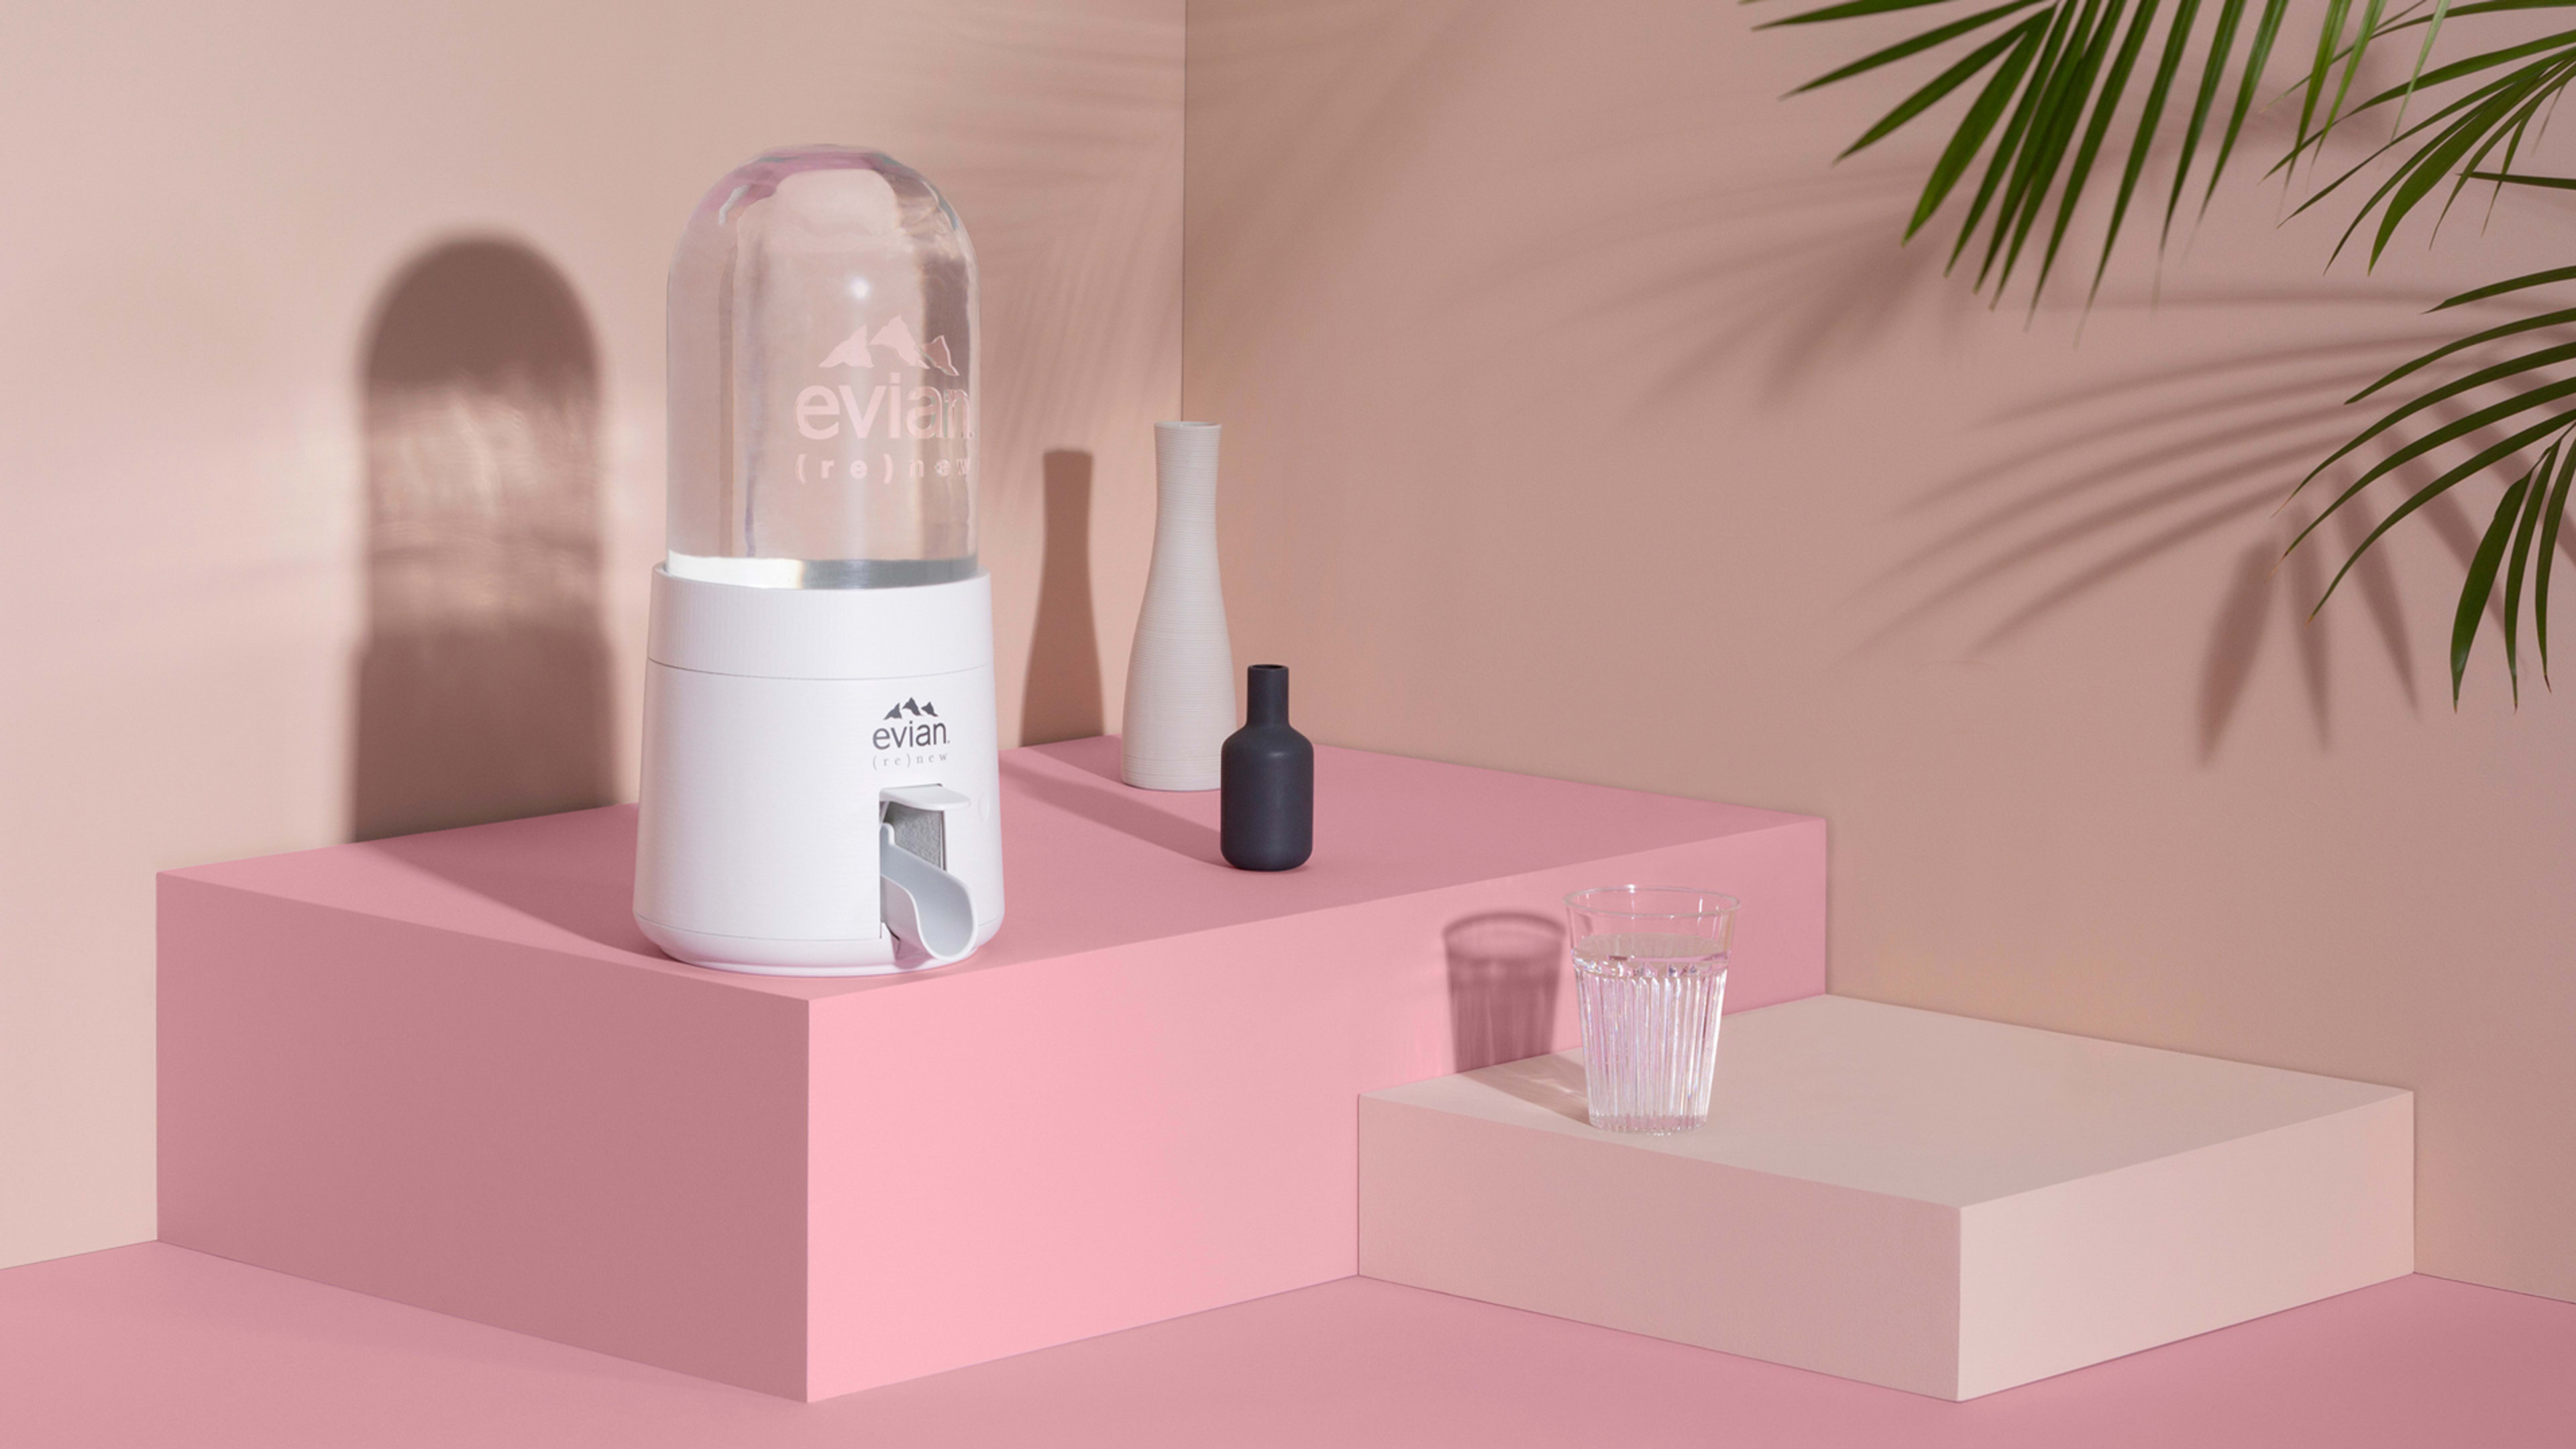 Evian’s new plastic water jugs shrink as you drink the water